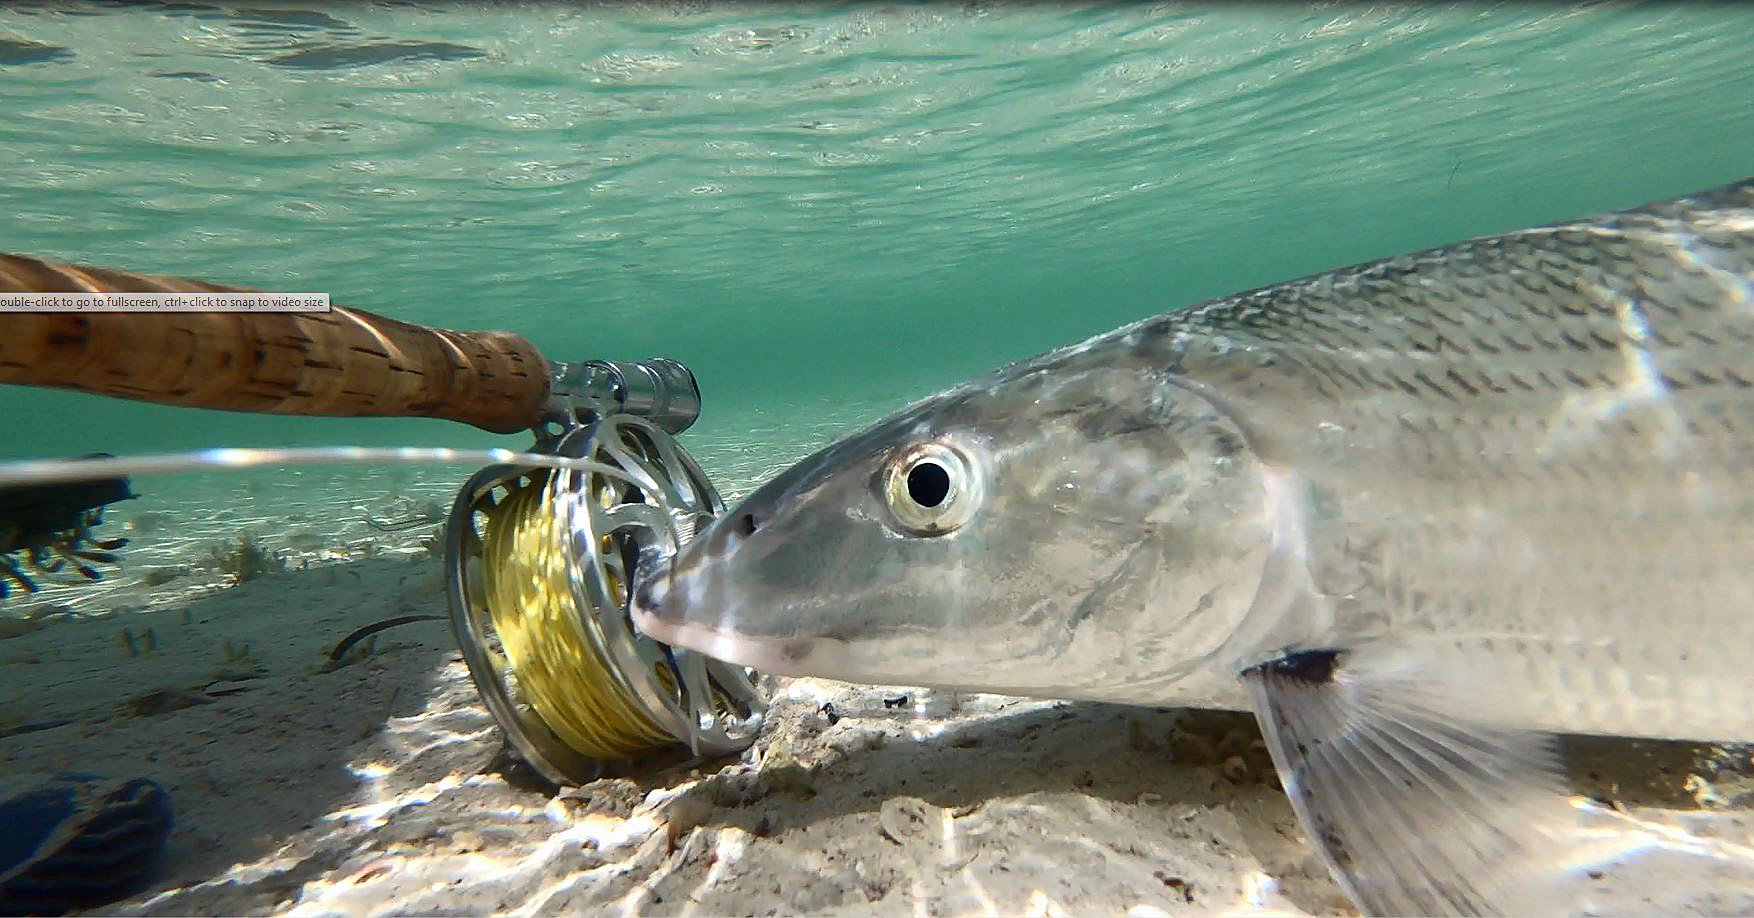 bonefish and reel sandy point southside 2018 edited